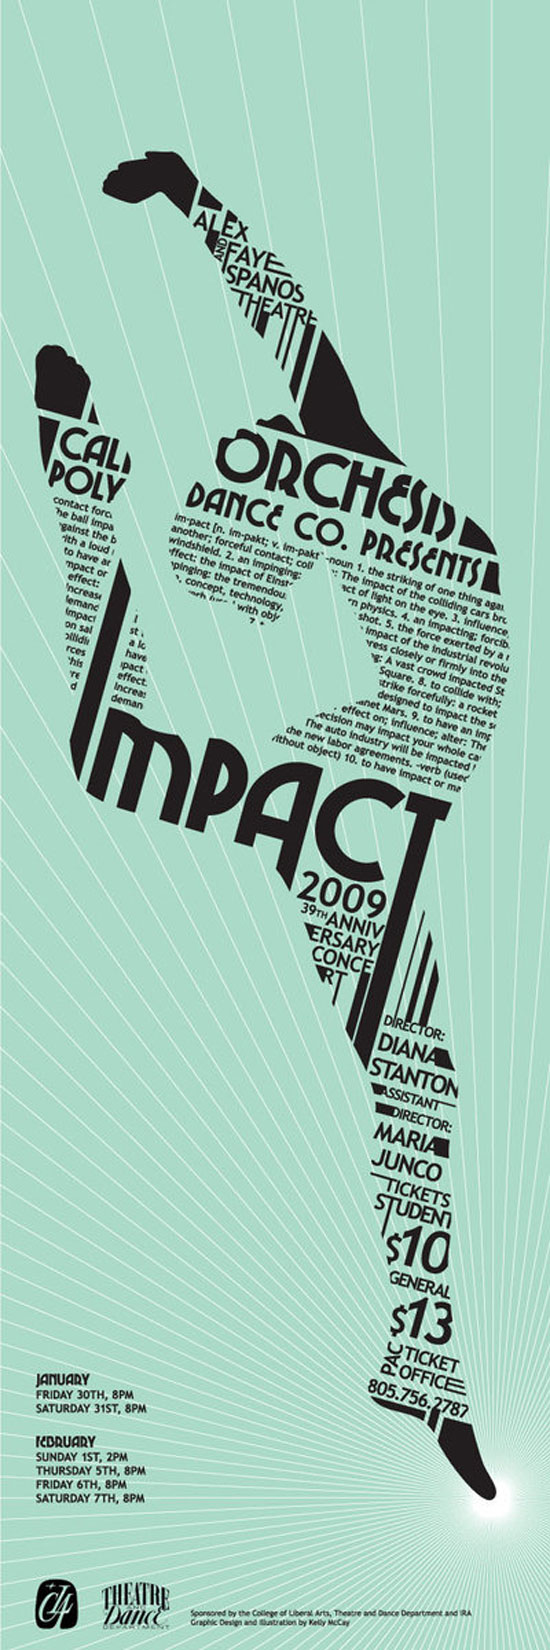 14.-Orchesis-2009-Poster-by-kmc-cal Typography posters: Tips, Best Practices, And 108 Examples